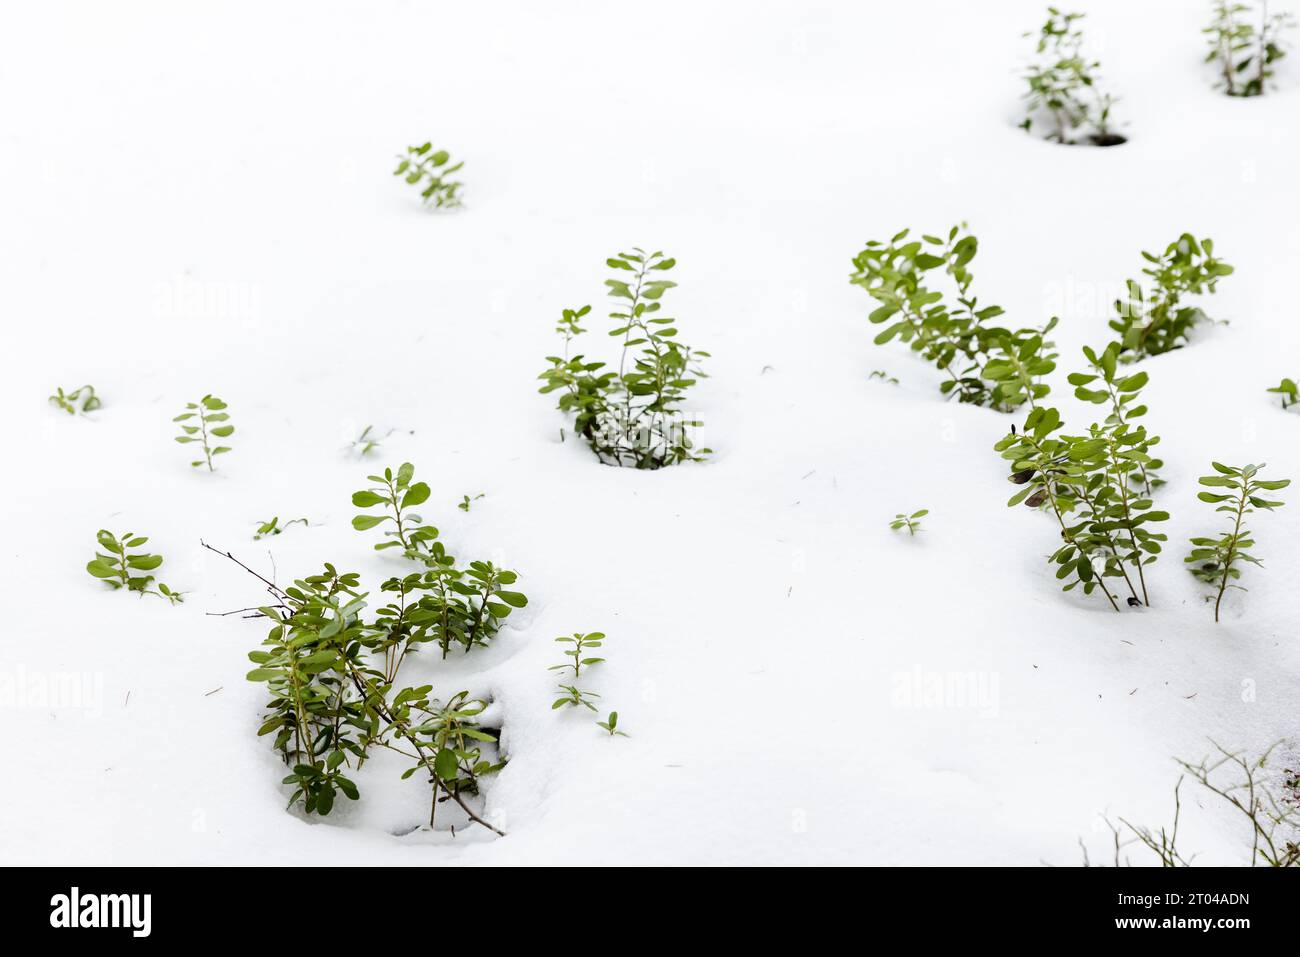 Green plants grow in a snowdrift on a winter day. Chamaedaphne calyculata, also known as leatherleaf or cassandra Stock Photo